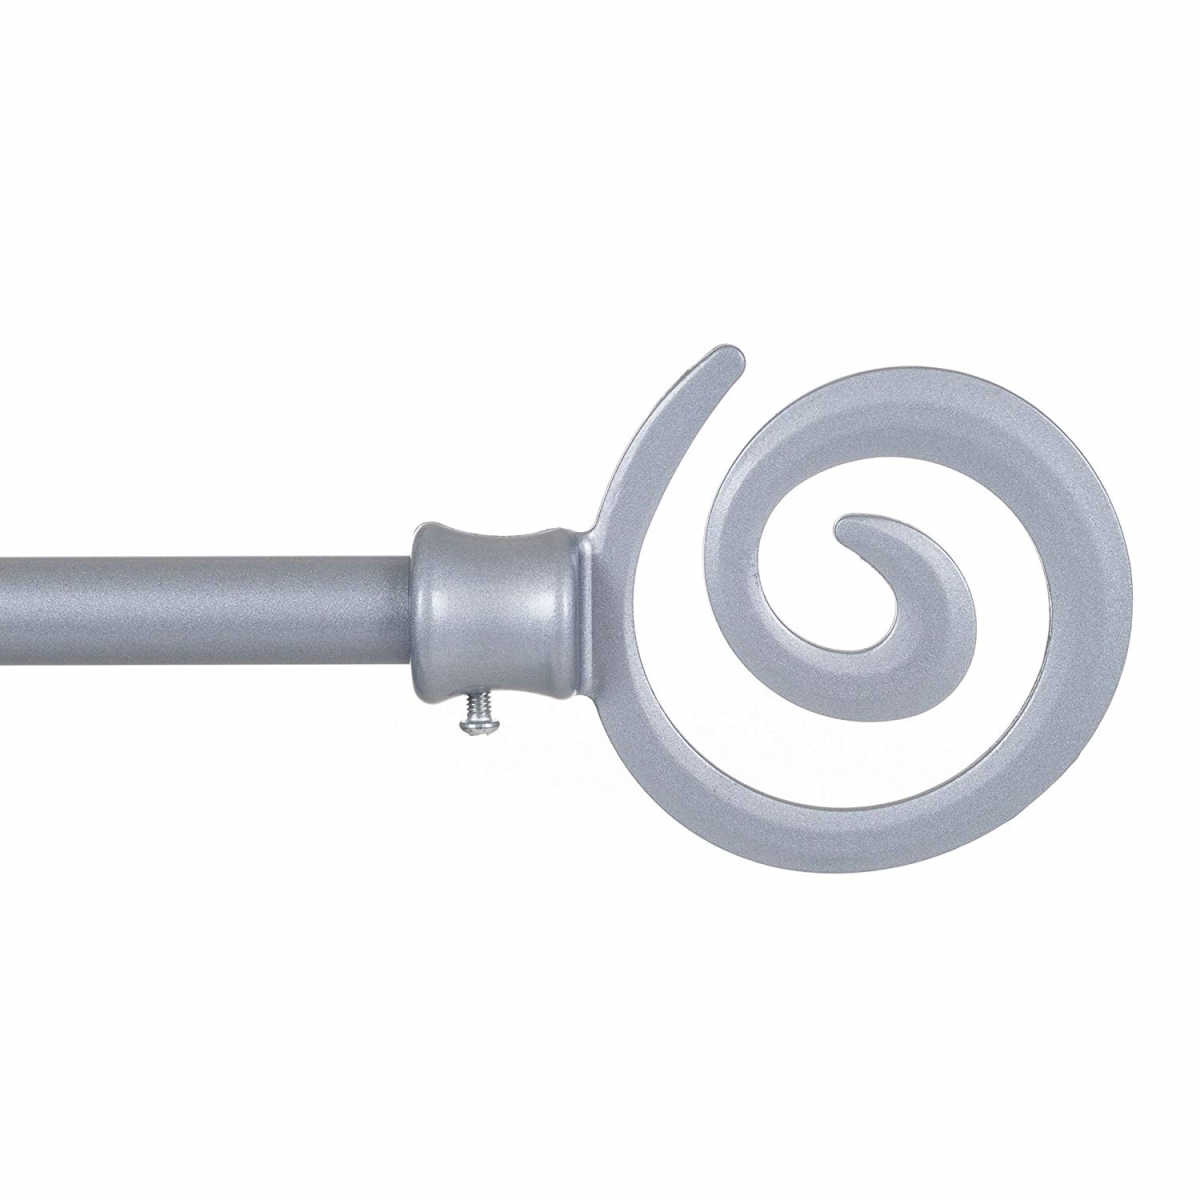 63a-06585 Spiral Curtain Rod, Silver - 0.75 In.